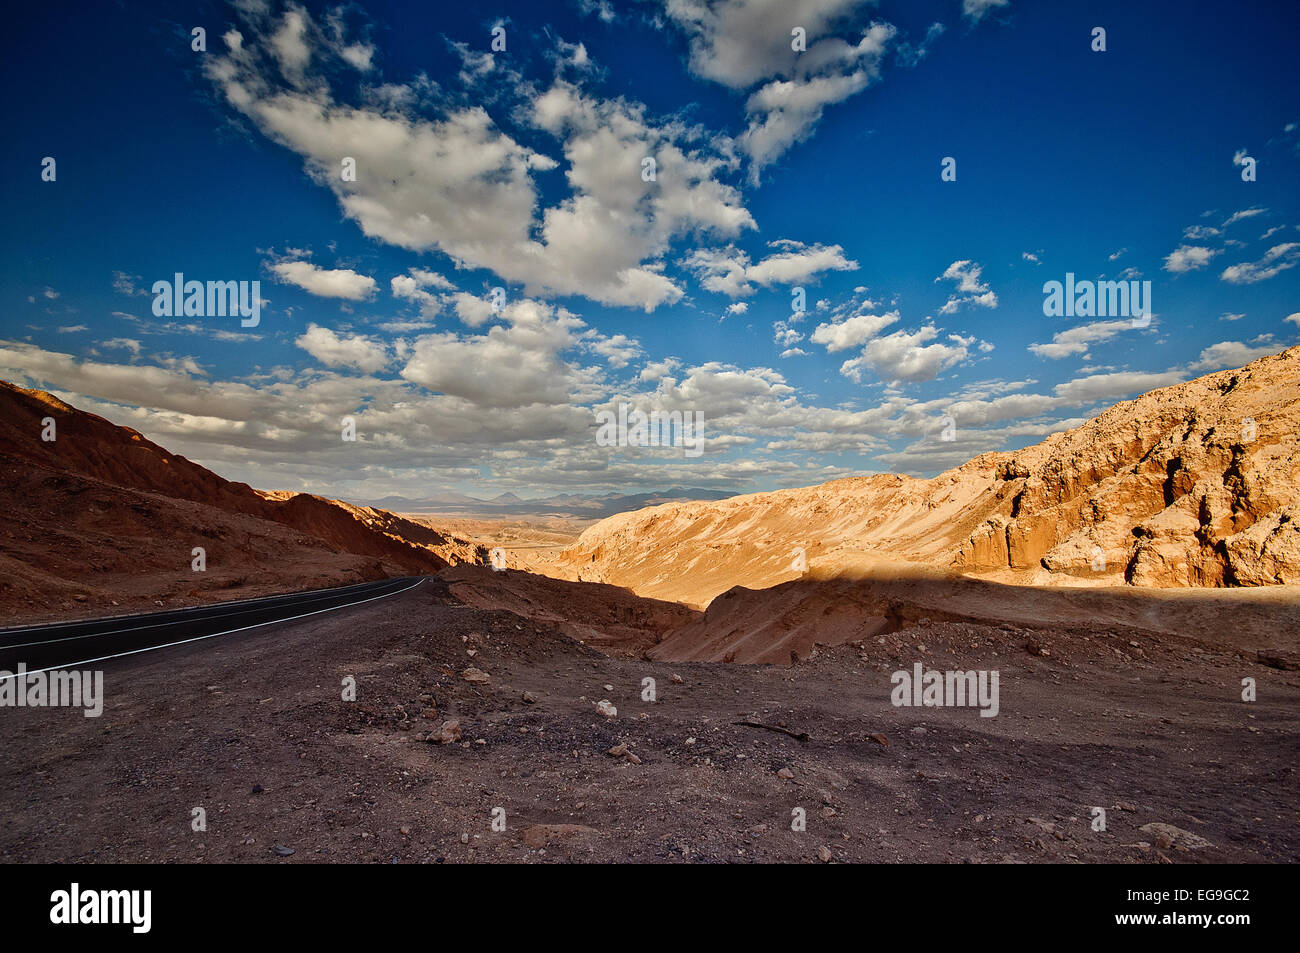 Chile, Altiplano, Clouds over mountain valley Stock Photo